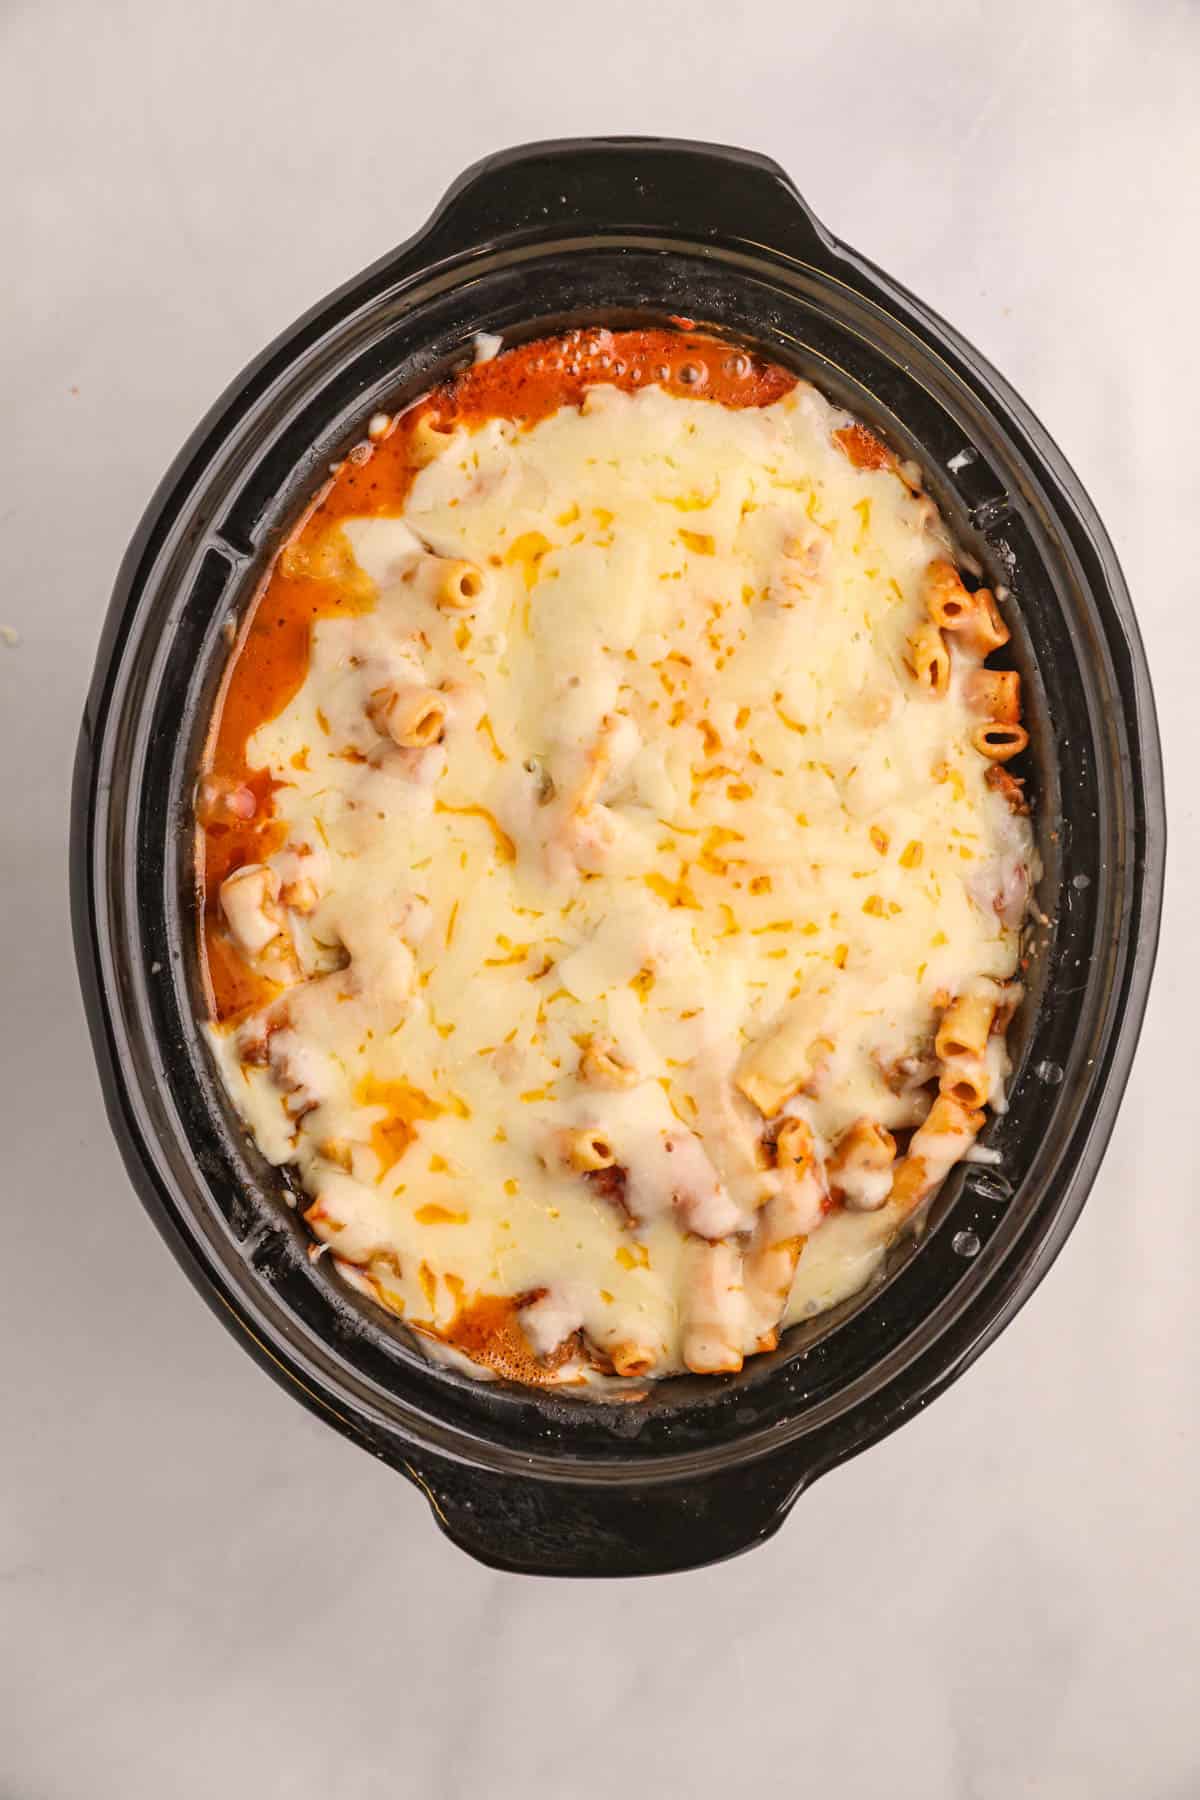 Melted mozzarella cheese on top of baked ziti in the slow ccooker.